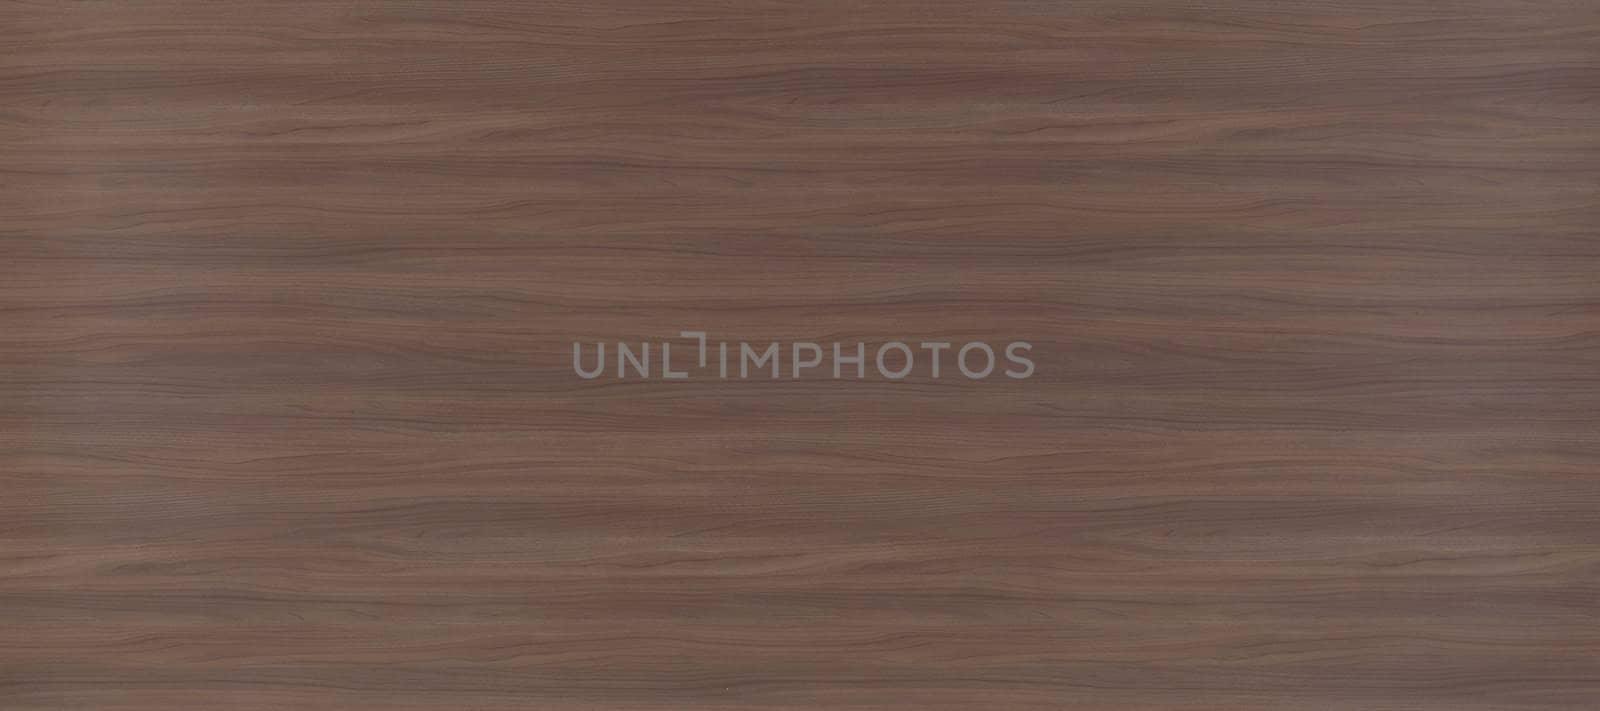 Texture of wood background by Baltus